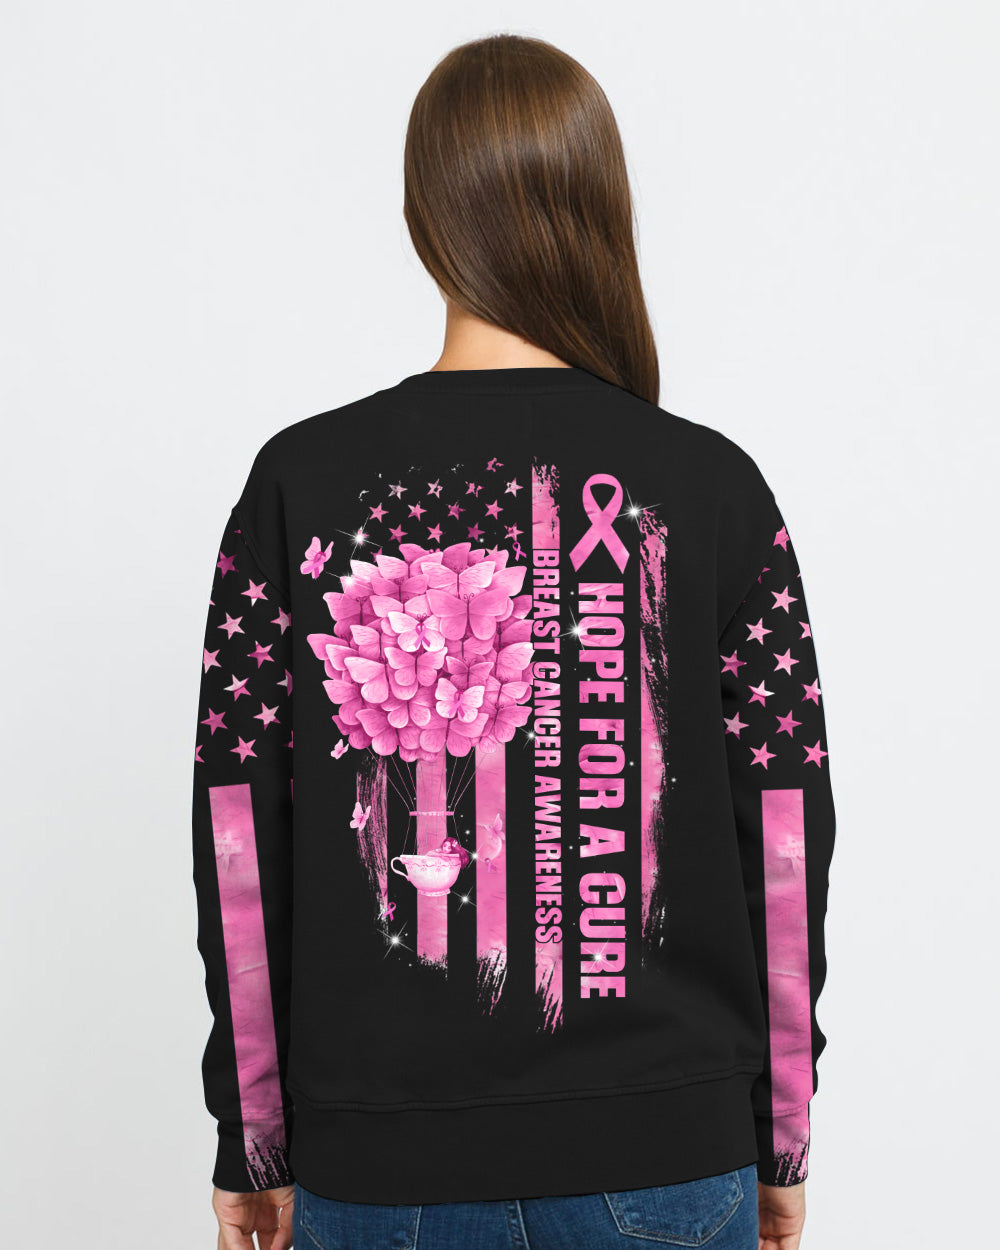 Hope For A Cure Butterfly Air Balloon Women's Breast Cancer Awareness Sweatshirt